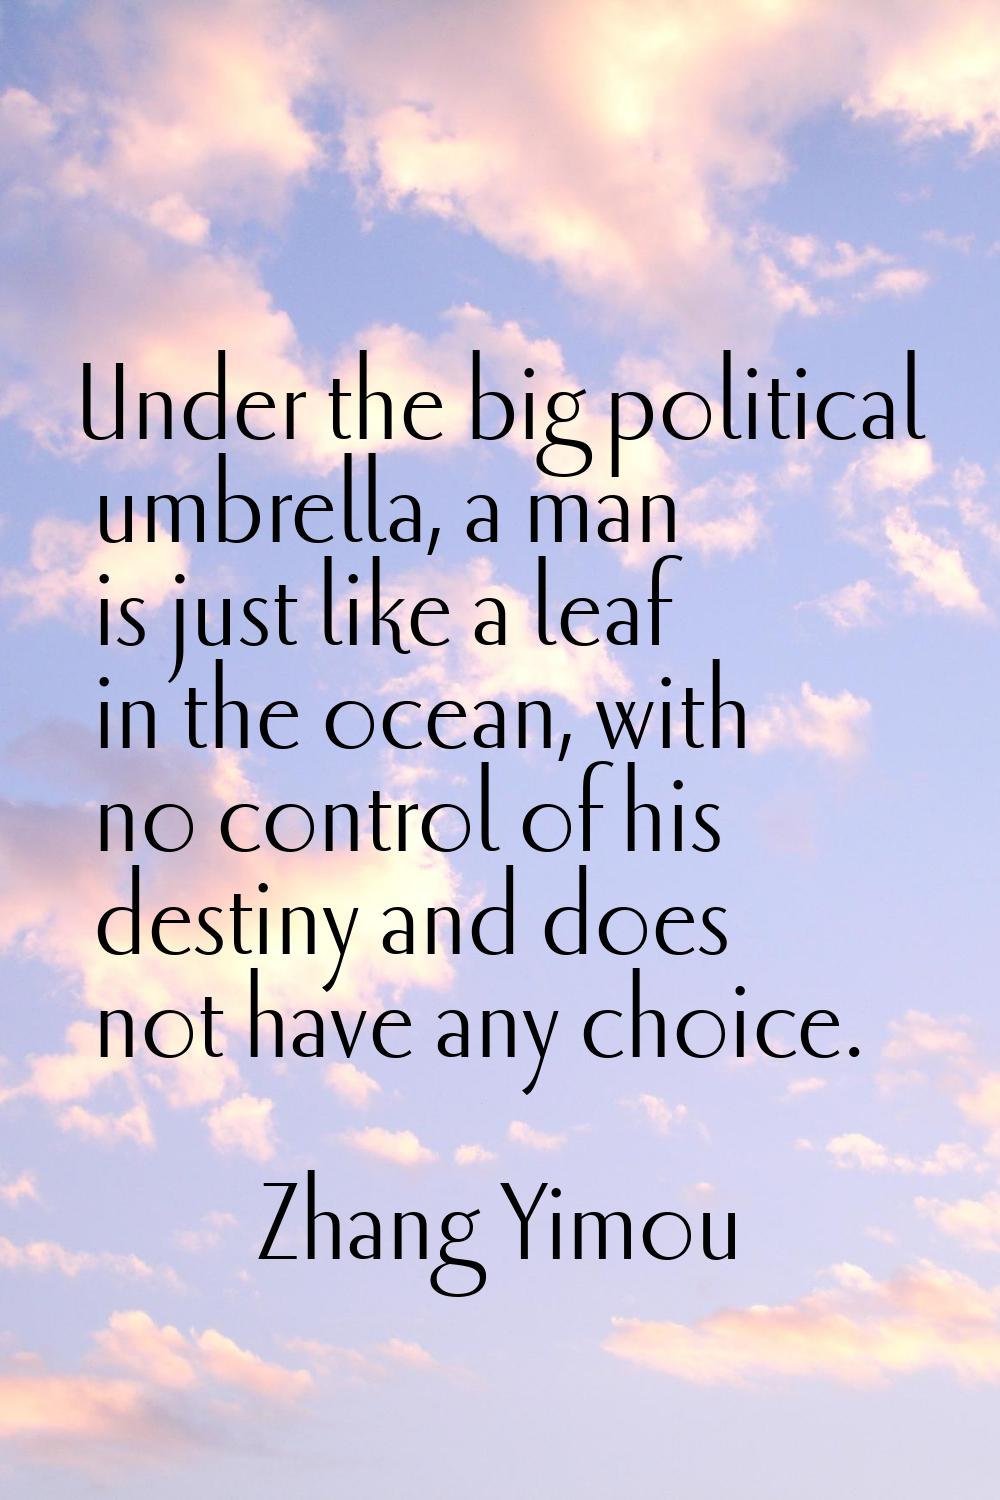 Under the big political umbrella, a man is just like a leaf in the ocean, with no control of his de